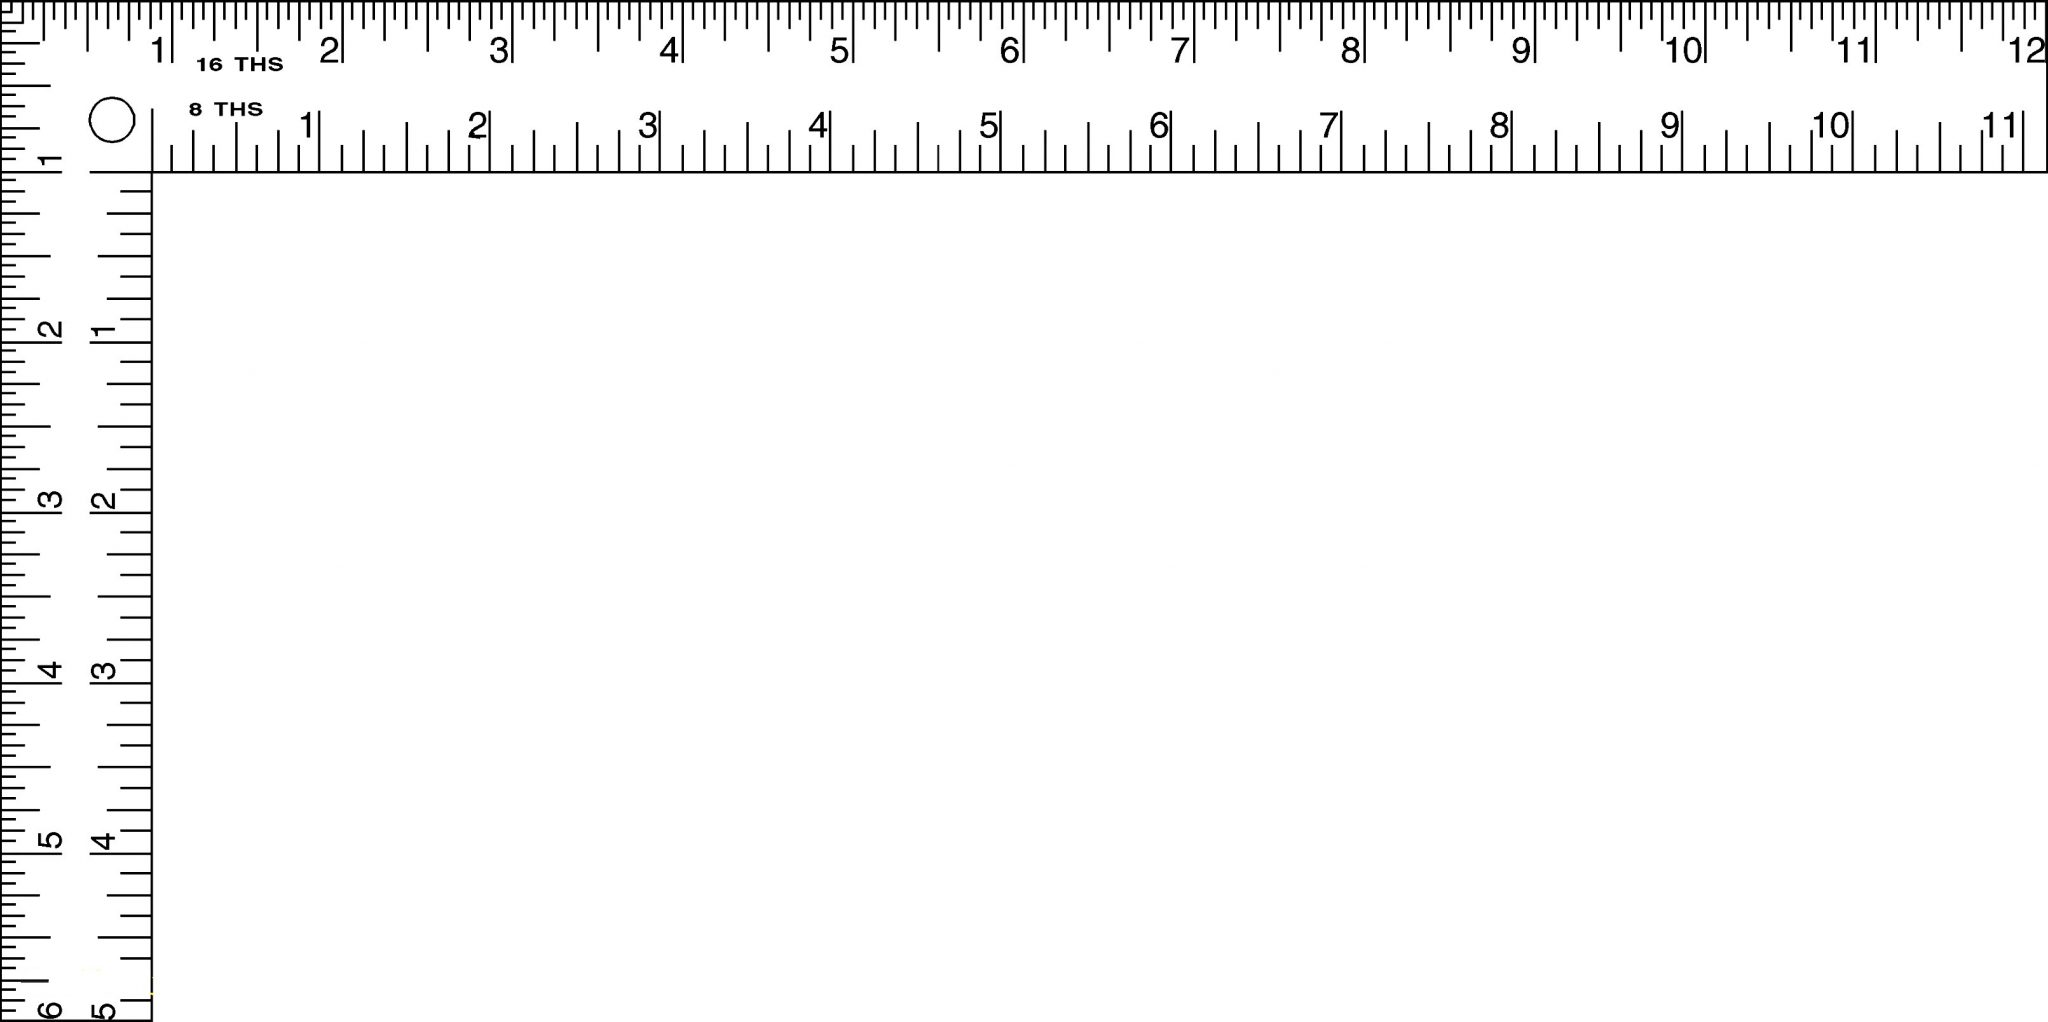 5 mm actual size chart